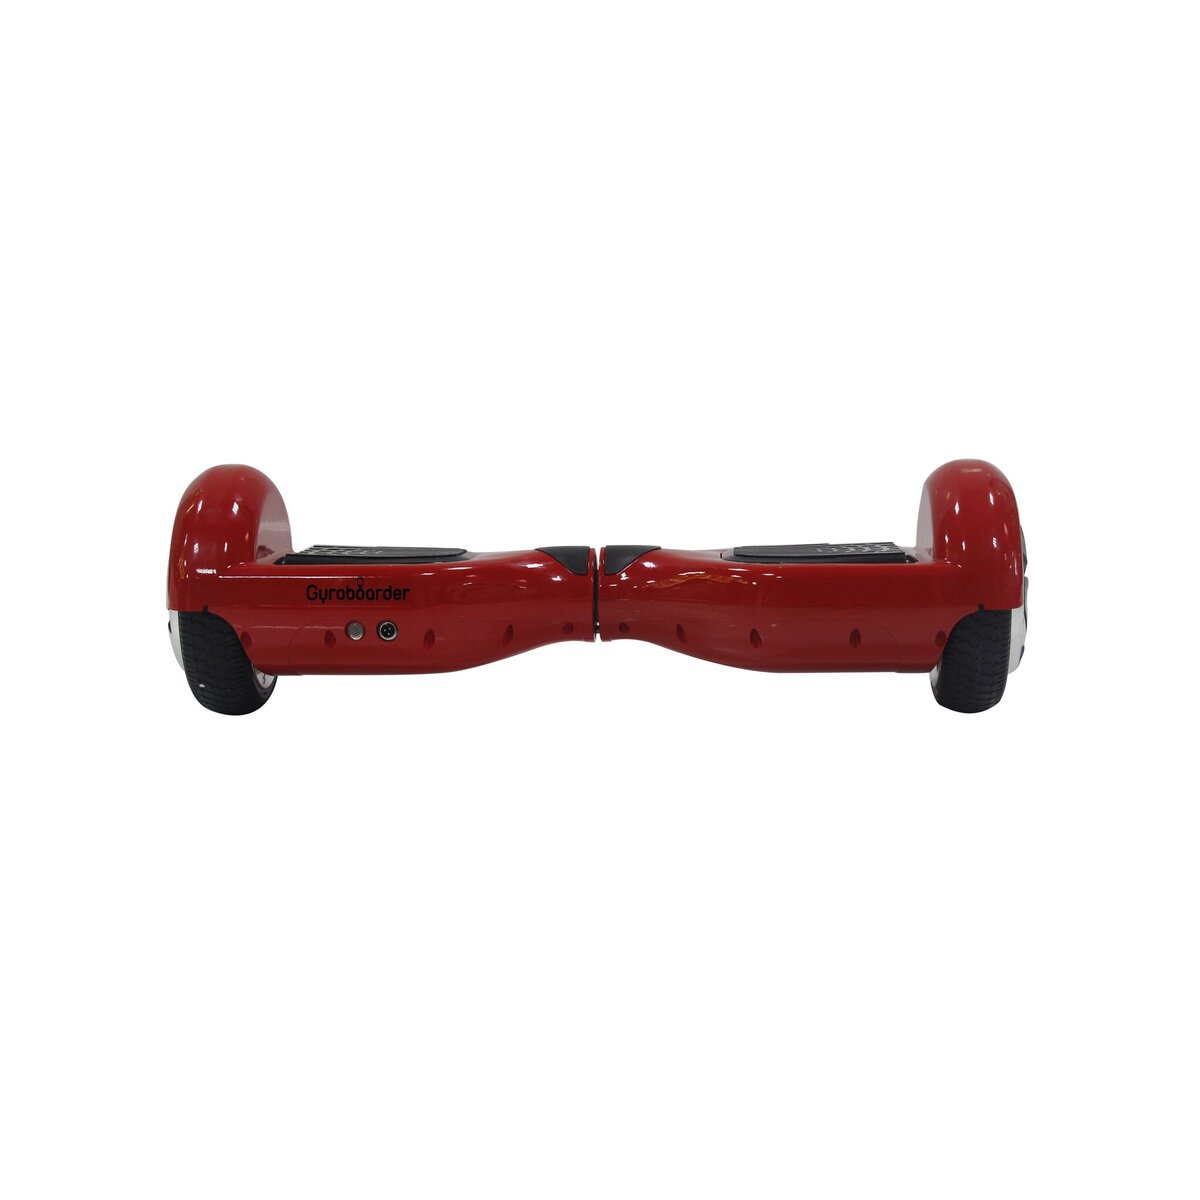 GYROBOARDER Hoverboard - GB094 - 6,5 pouces - Rouge